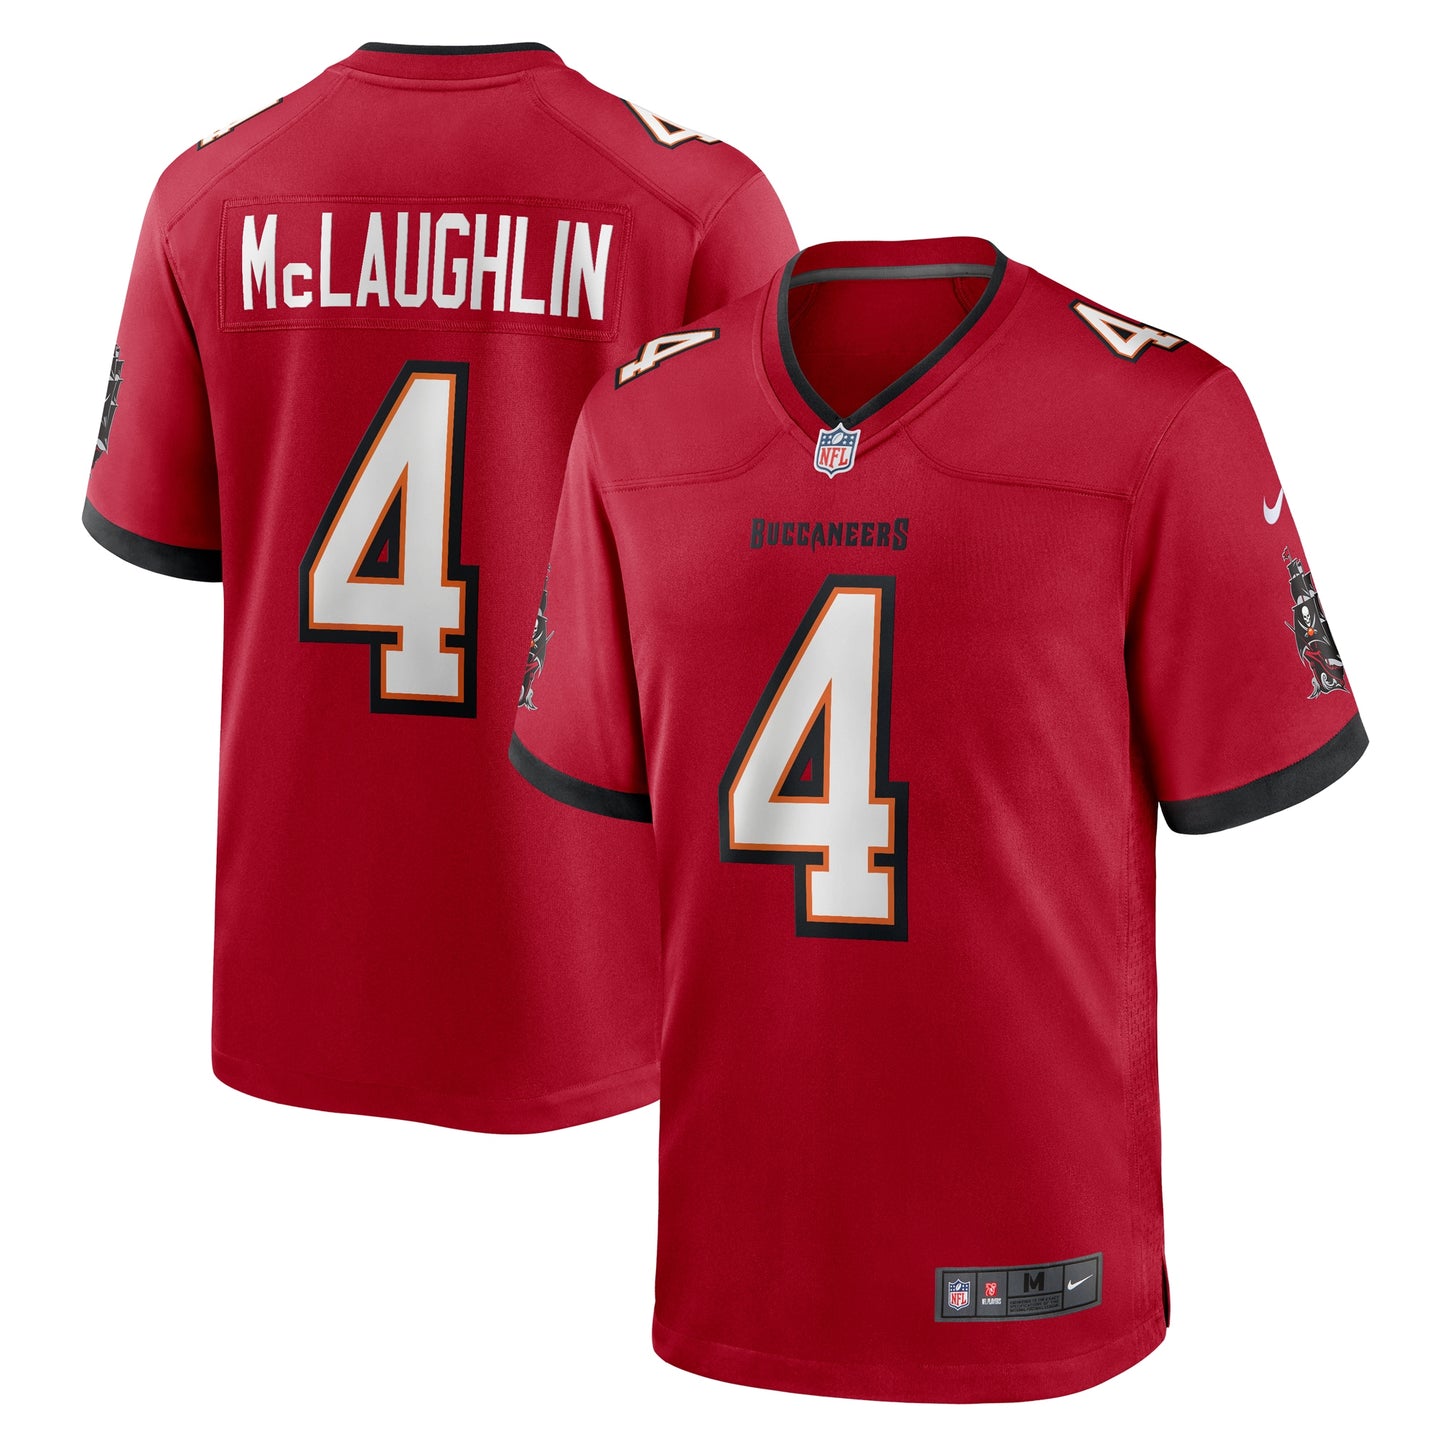 Chase McLaughlin Tampa Bay Buccaneers Nike Game Player Jersey - Red